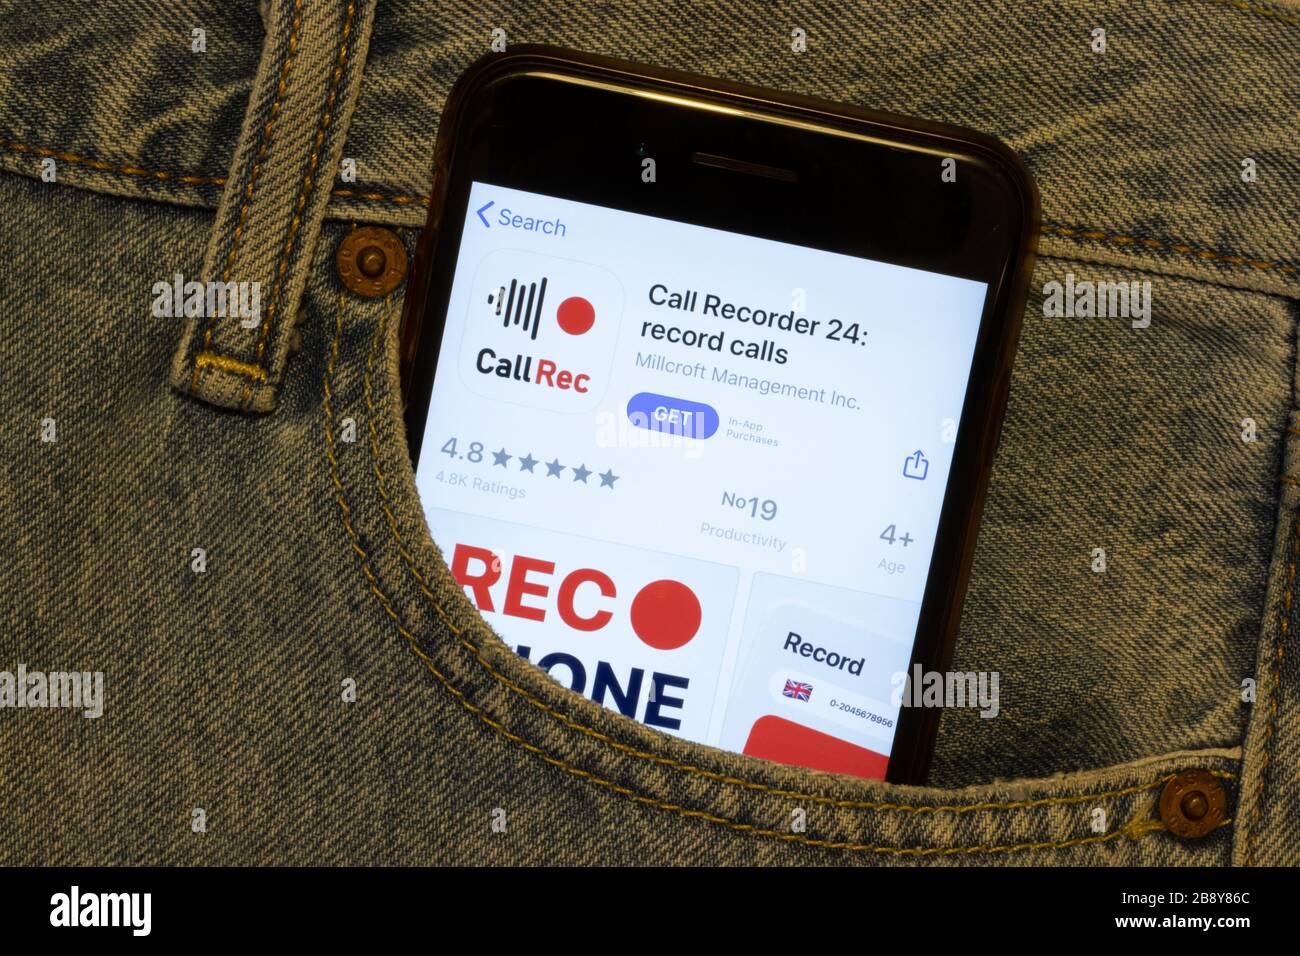 Los Angeles, California, USA - 24 March 2020: Call Recorder 24 app logo on  phone screen in jeans pocket close-up, Illustrative Editorial Stock Photo -  Alamy